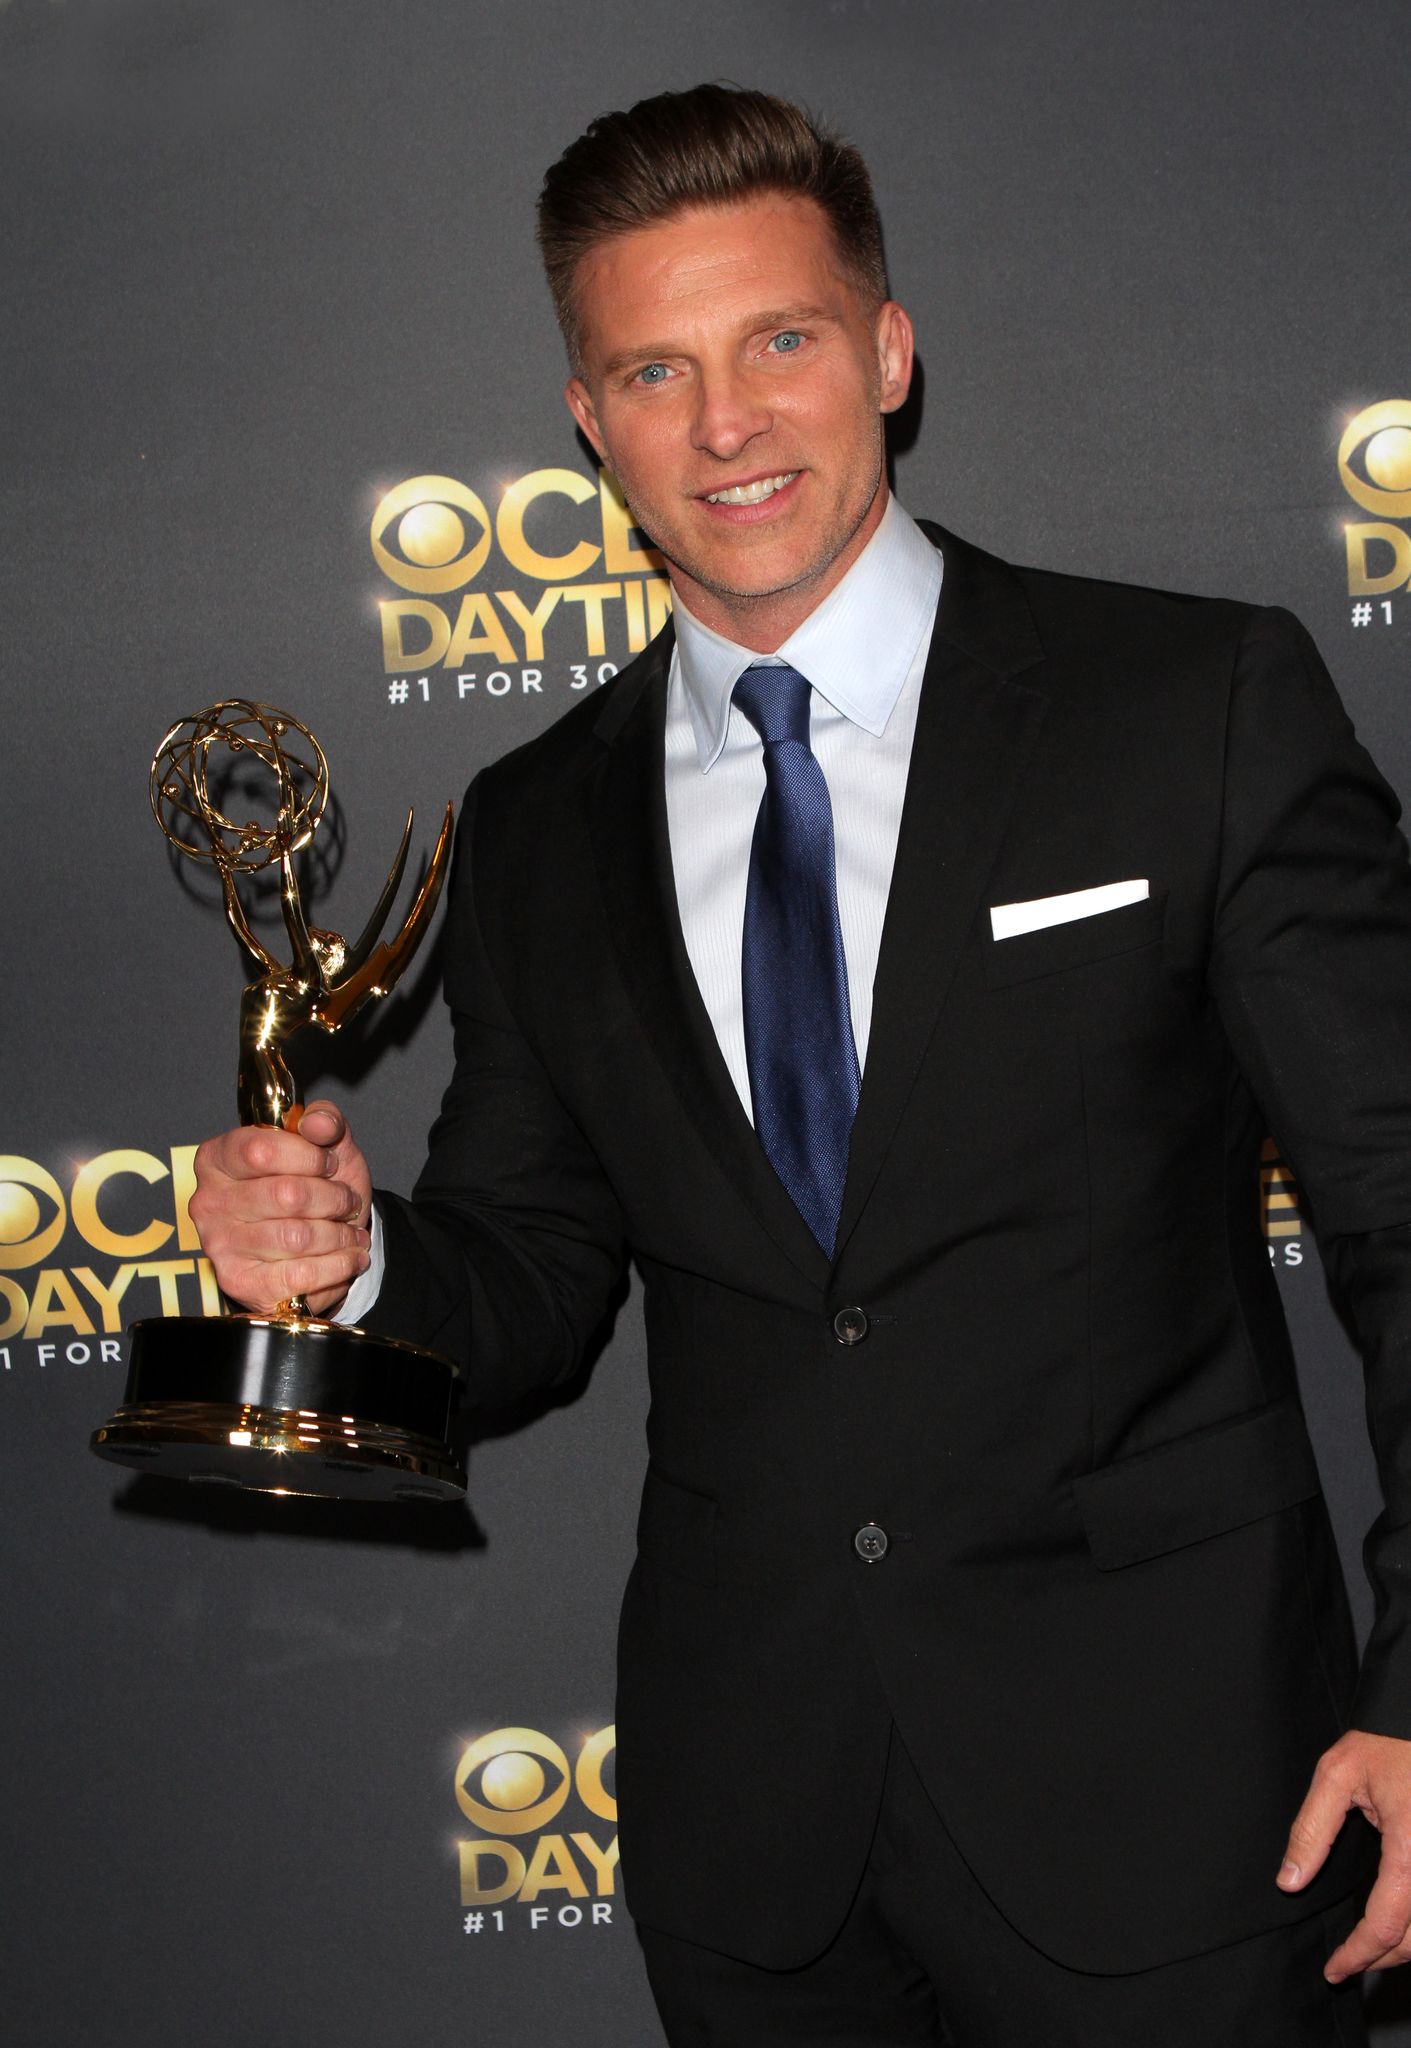 Steve Burton during the CBS Daytime Emmy after party at Pasadena Civic Auditorium on April 30, 2017 in Pasadena, California. | Source: Getty Images